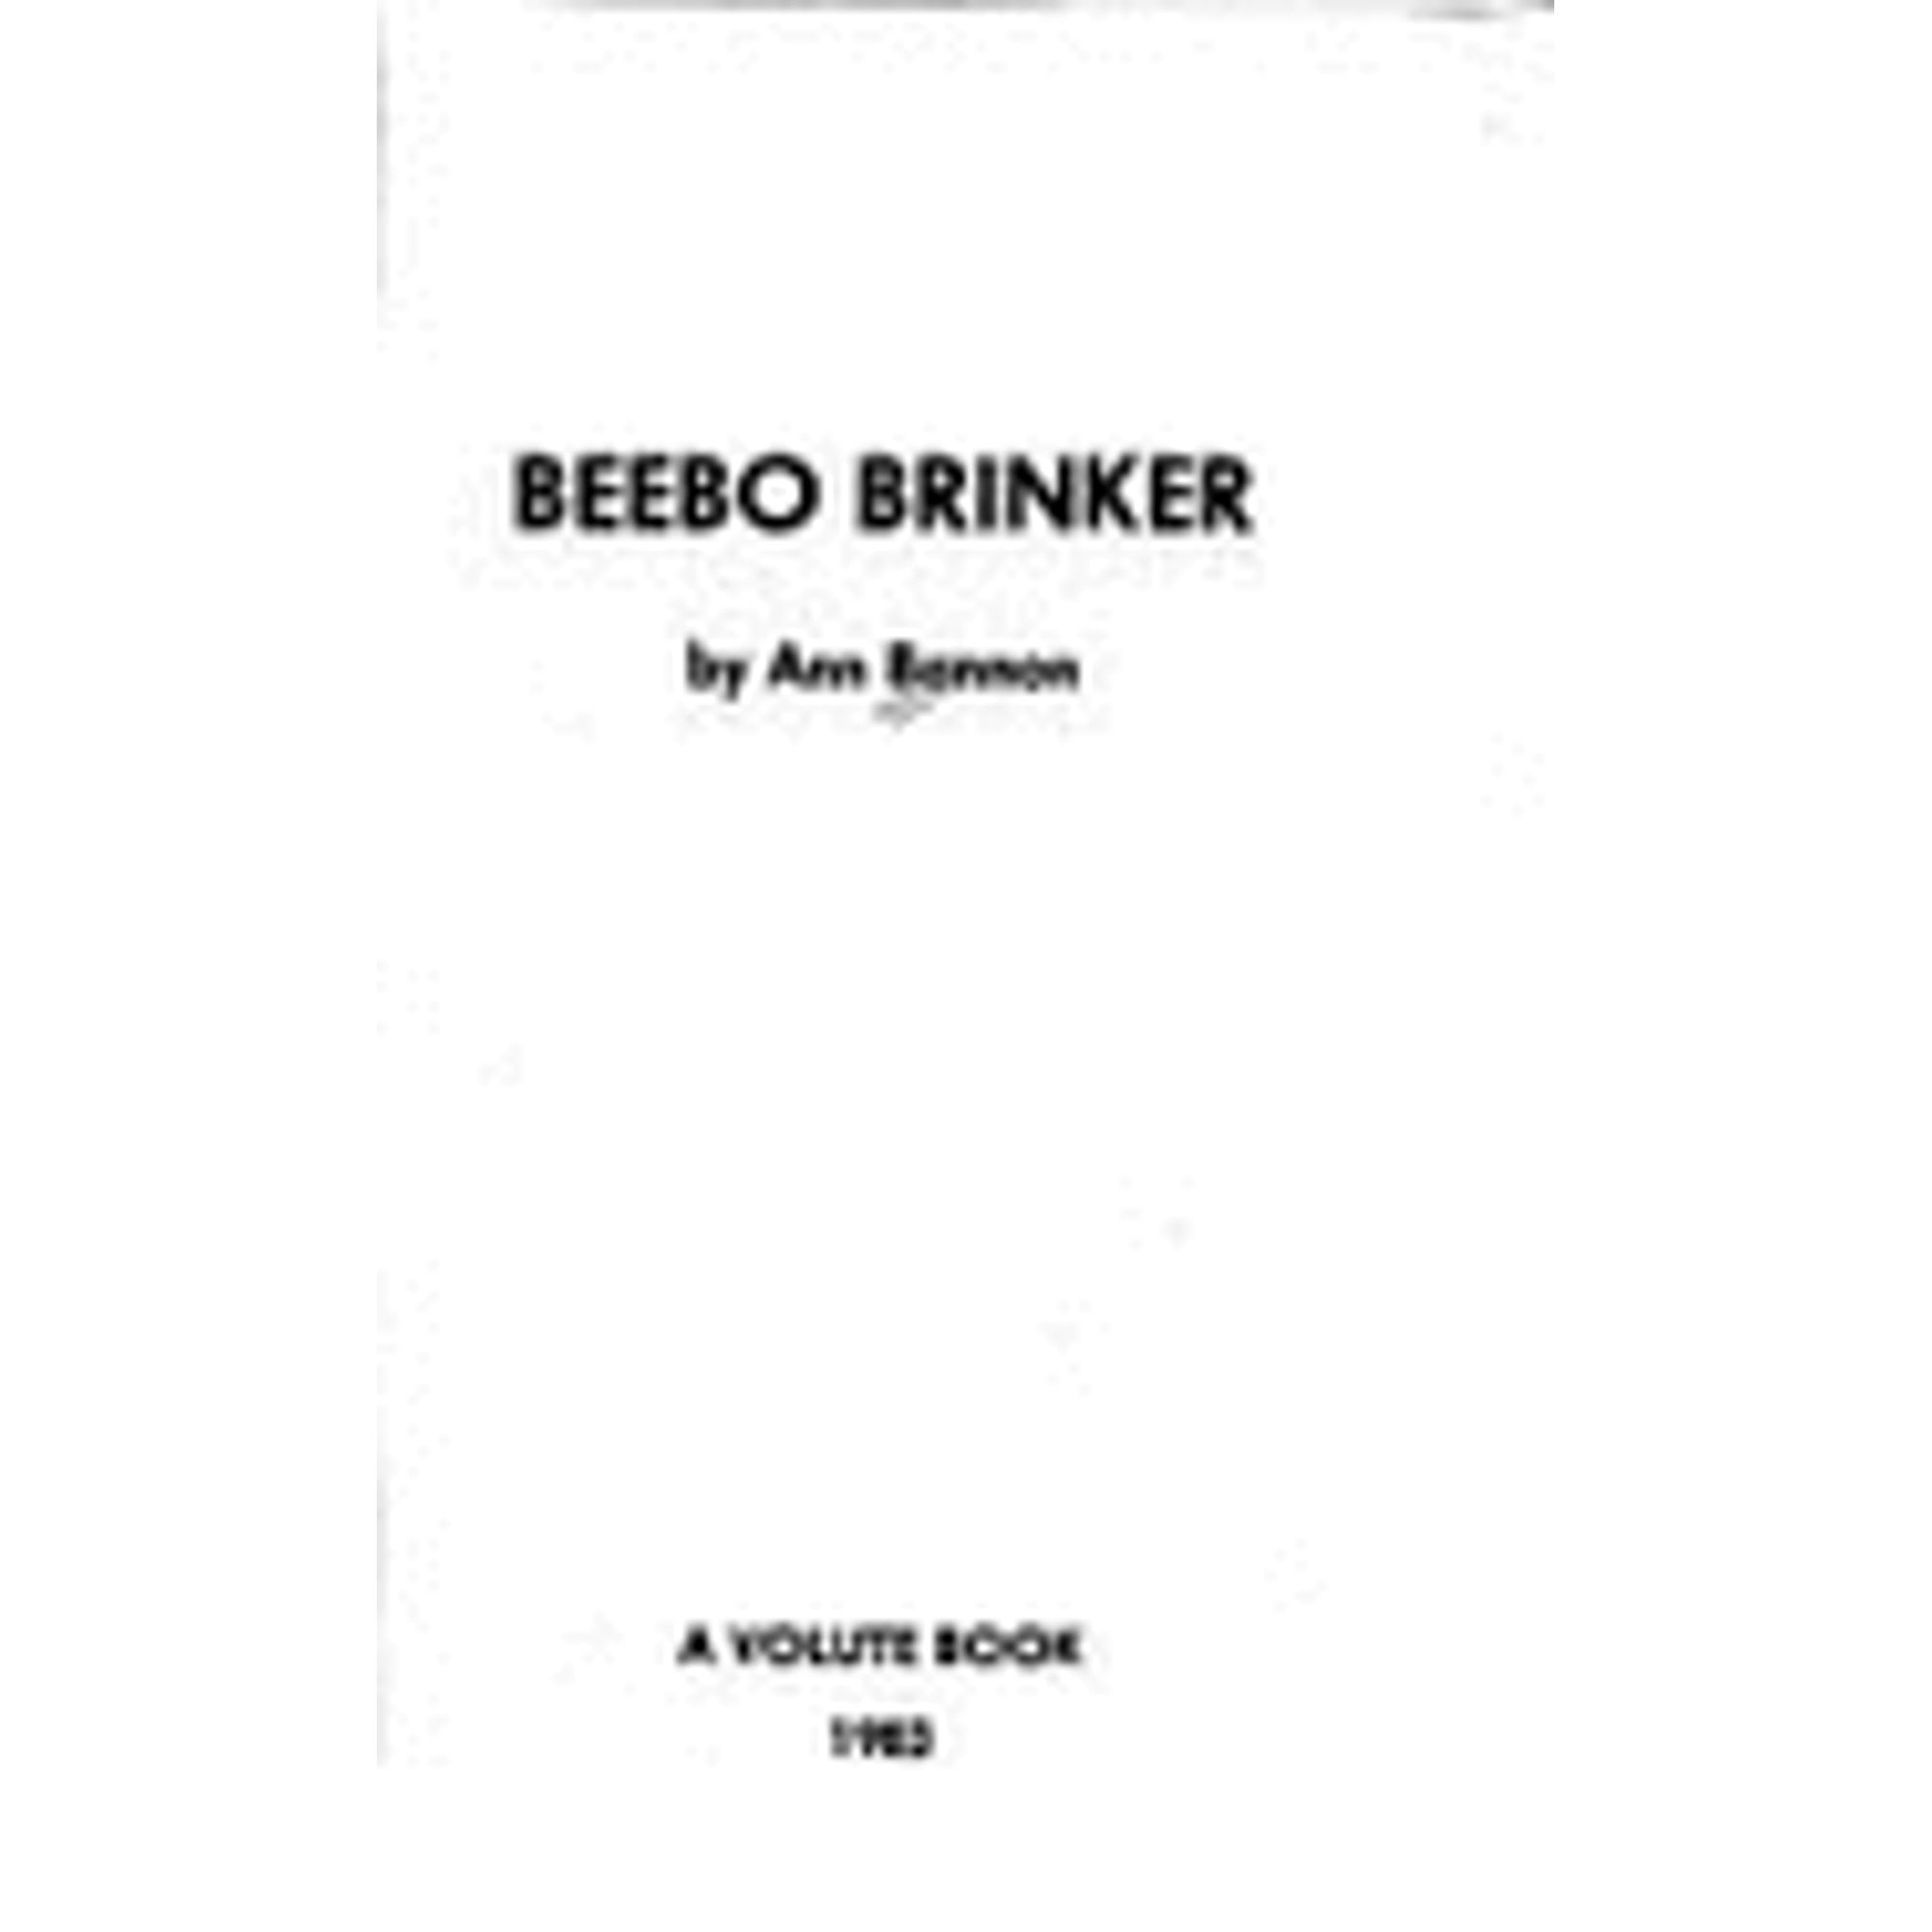 Pre-Owned Beebo Brinker (Paperback 9780930044381) by Ann Bannon